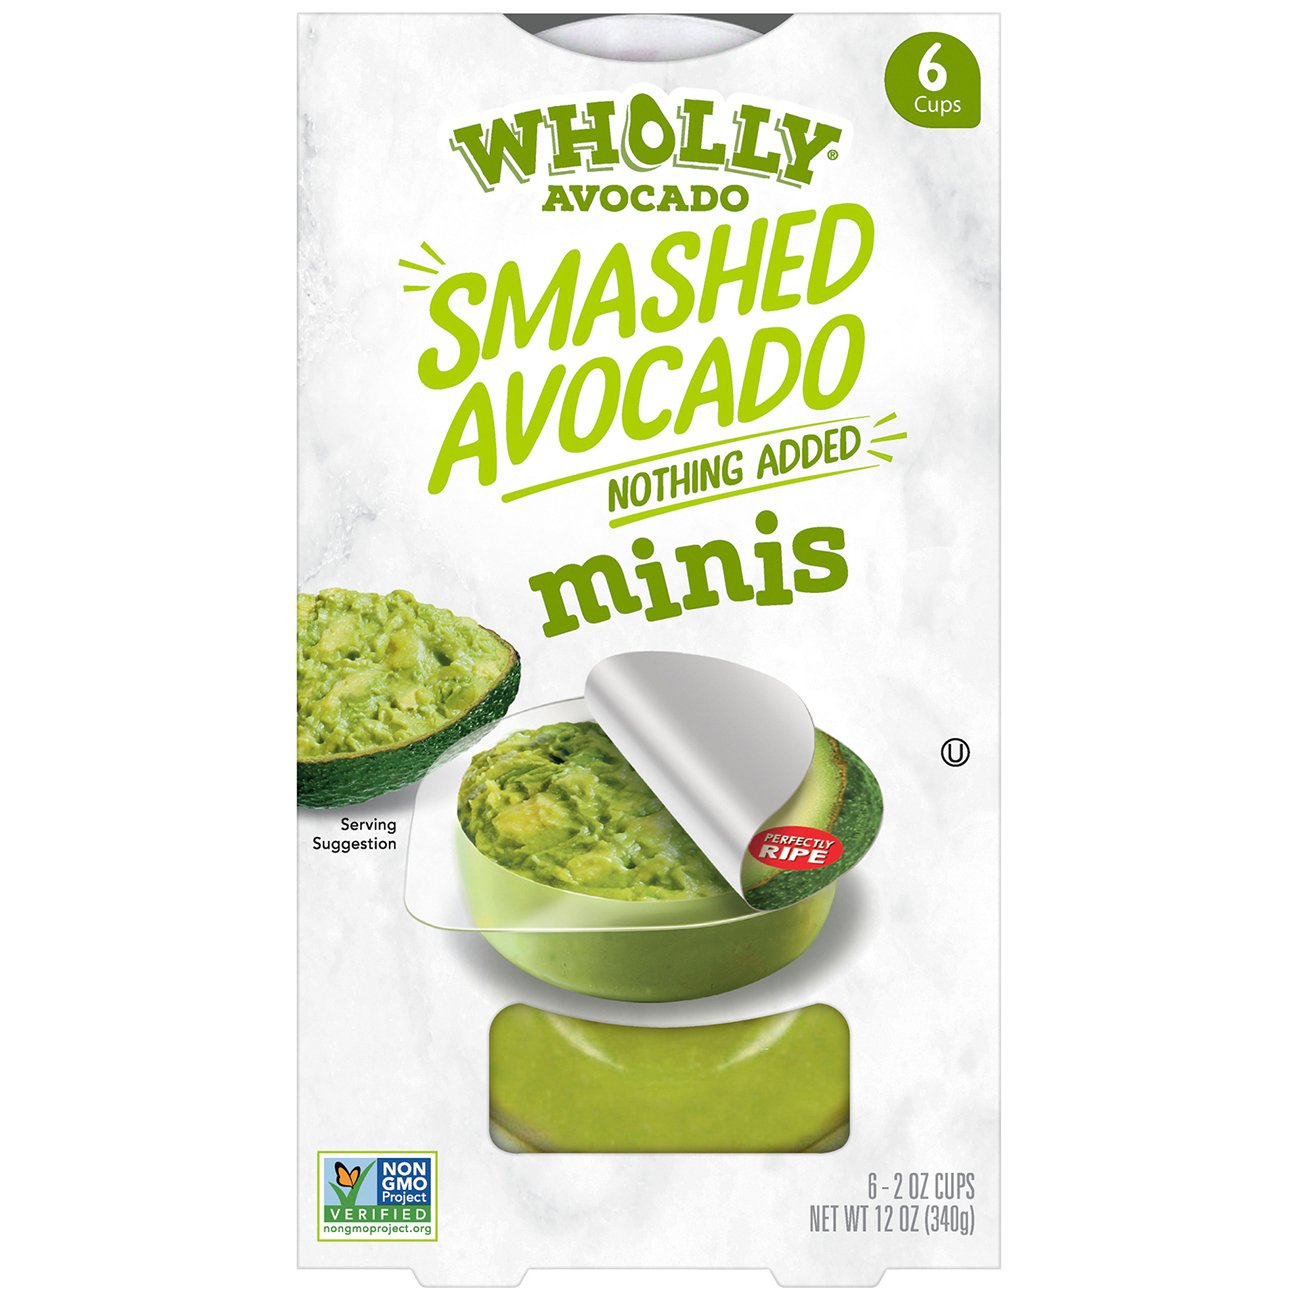 Knobby - Rock Out with your Guac Out! Limited edition avocado